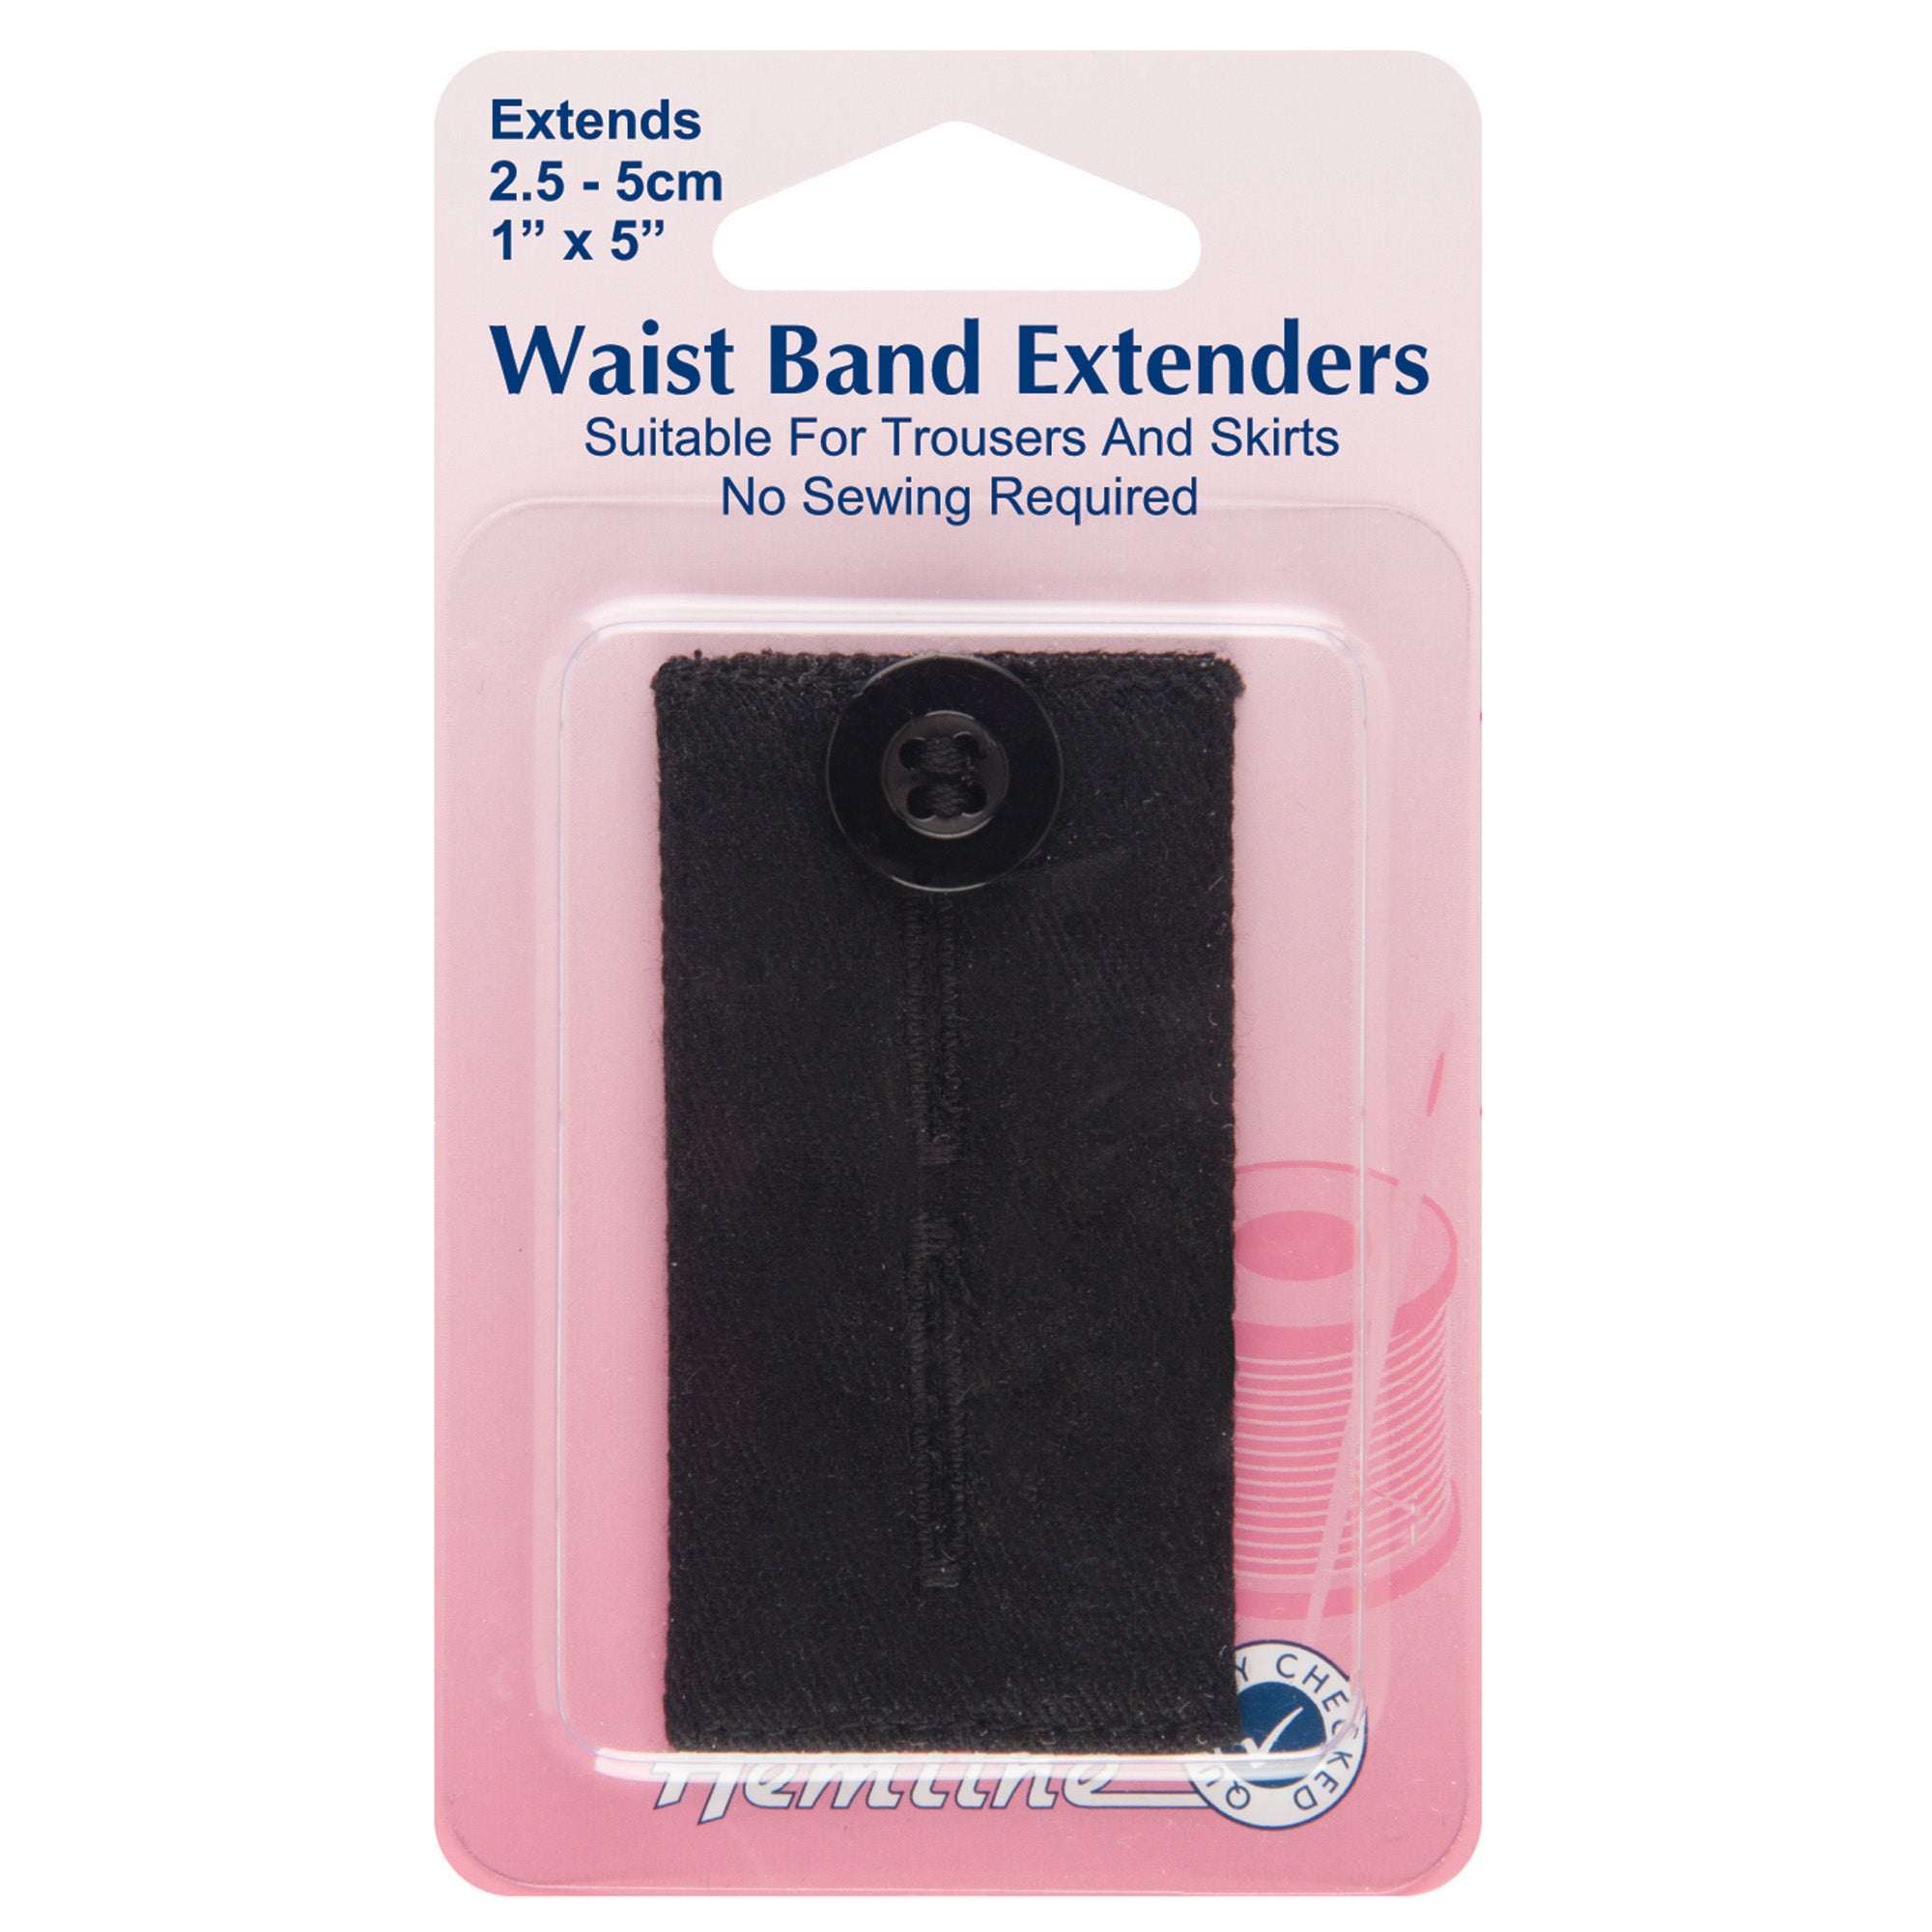 Button Expanders No Sewing Required Button Extender for Pants